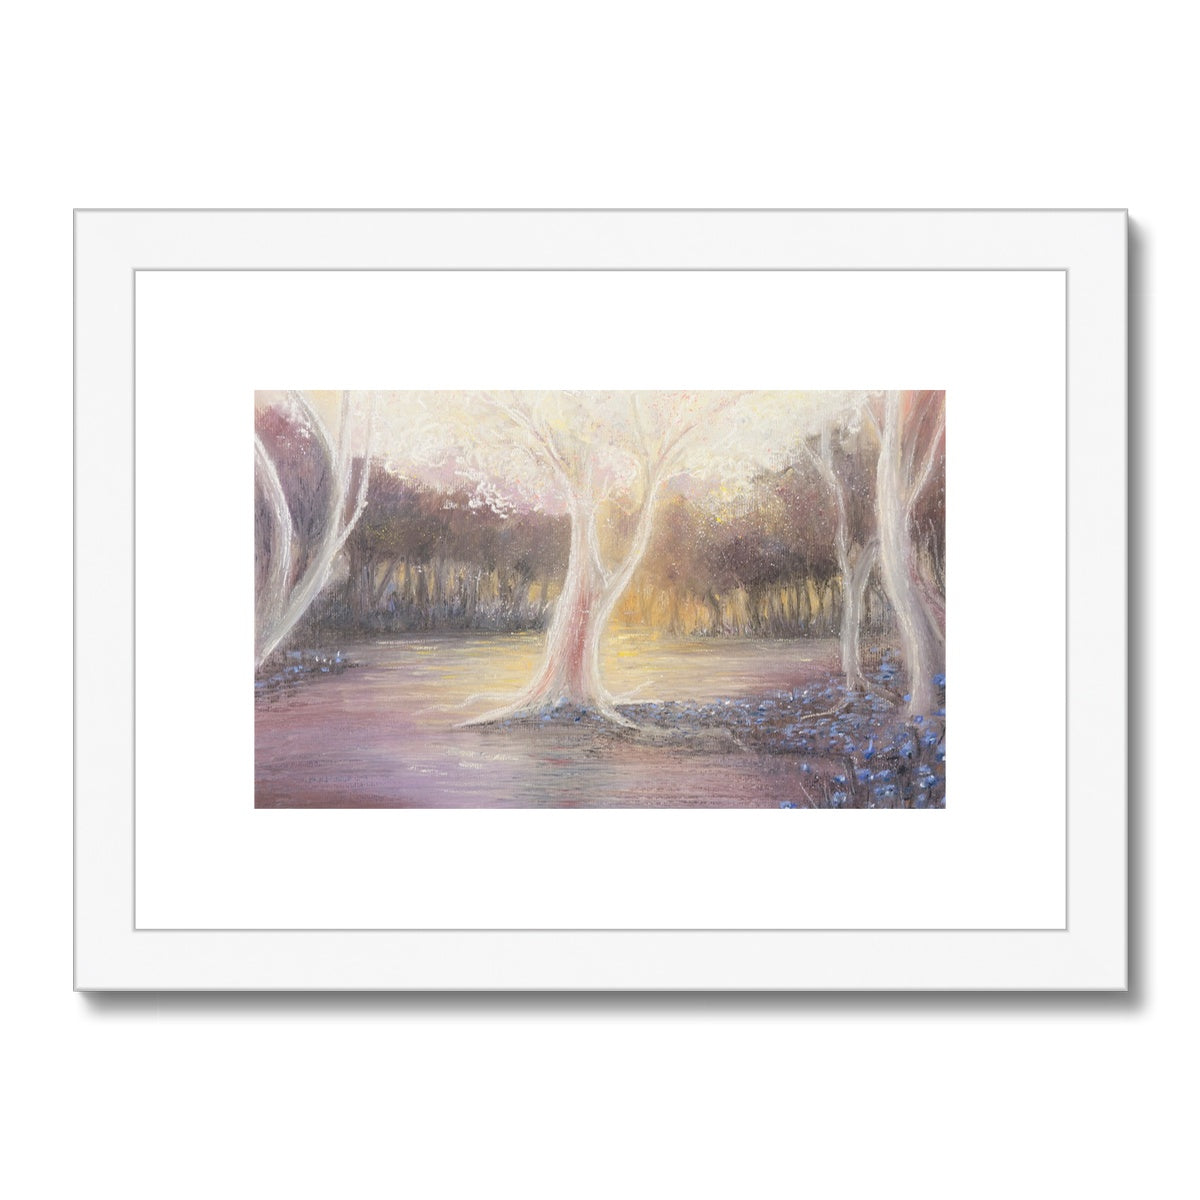 The White Tree Framed & Mounted Print